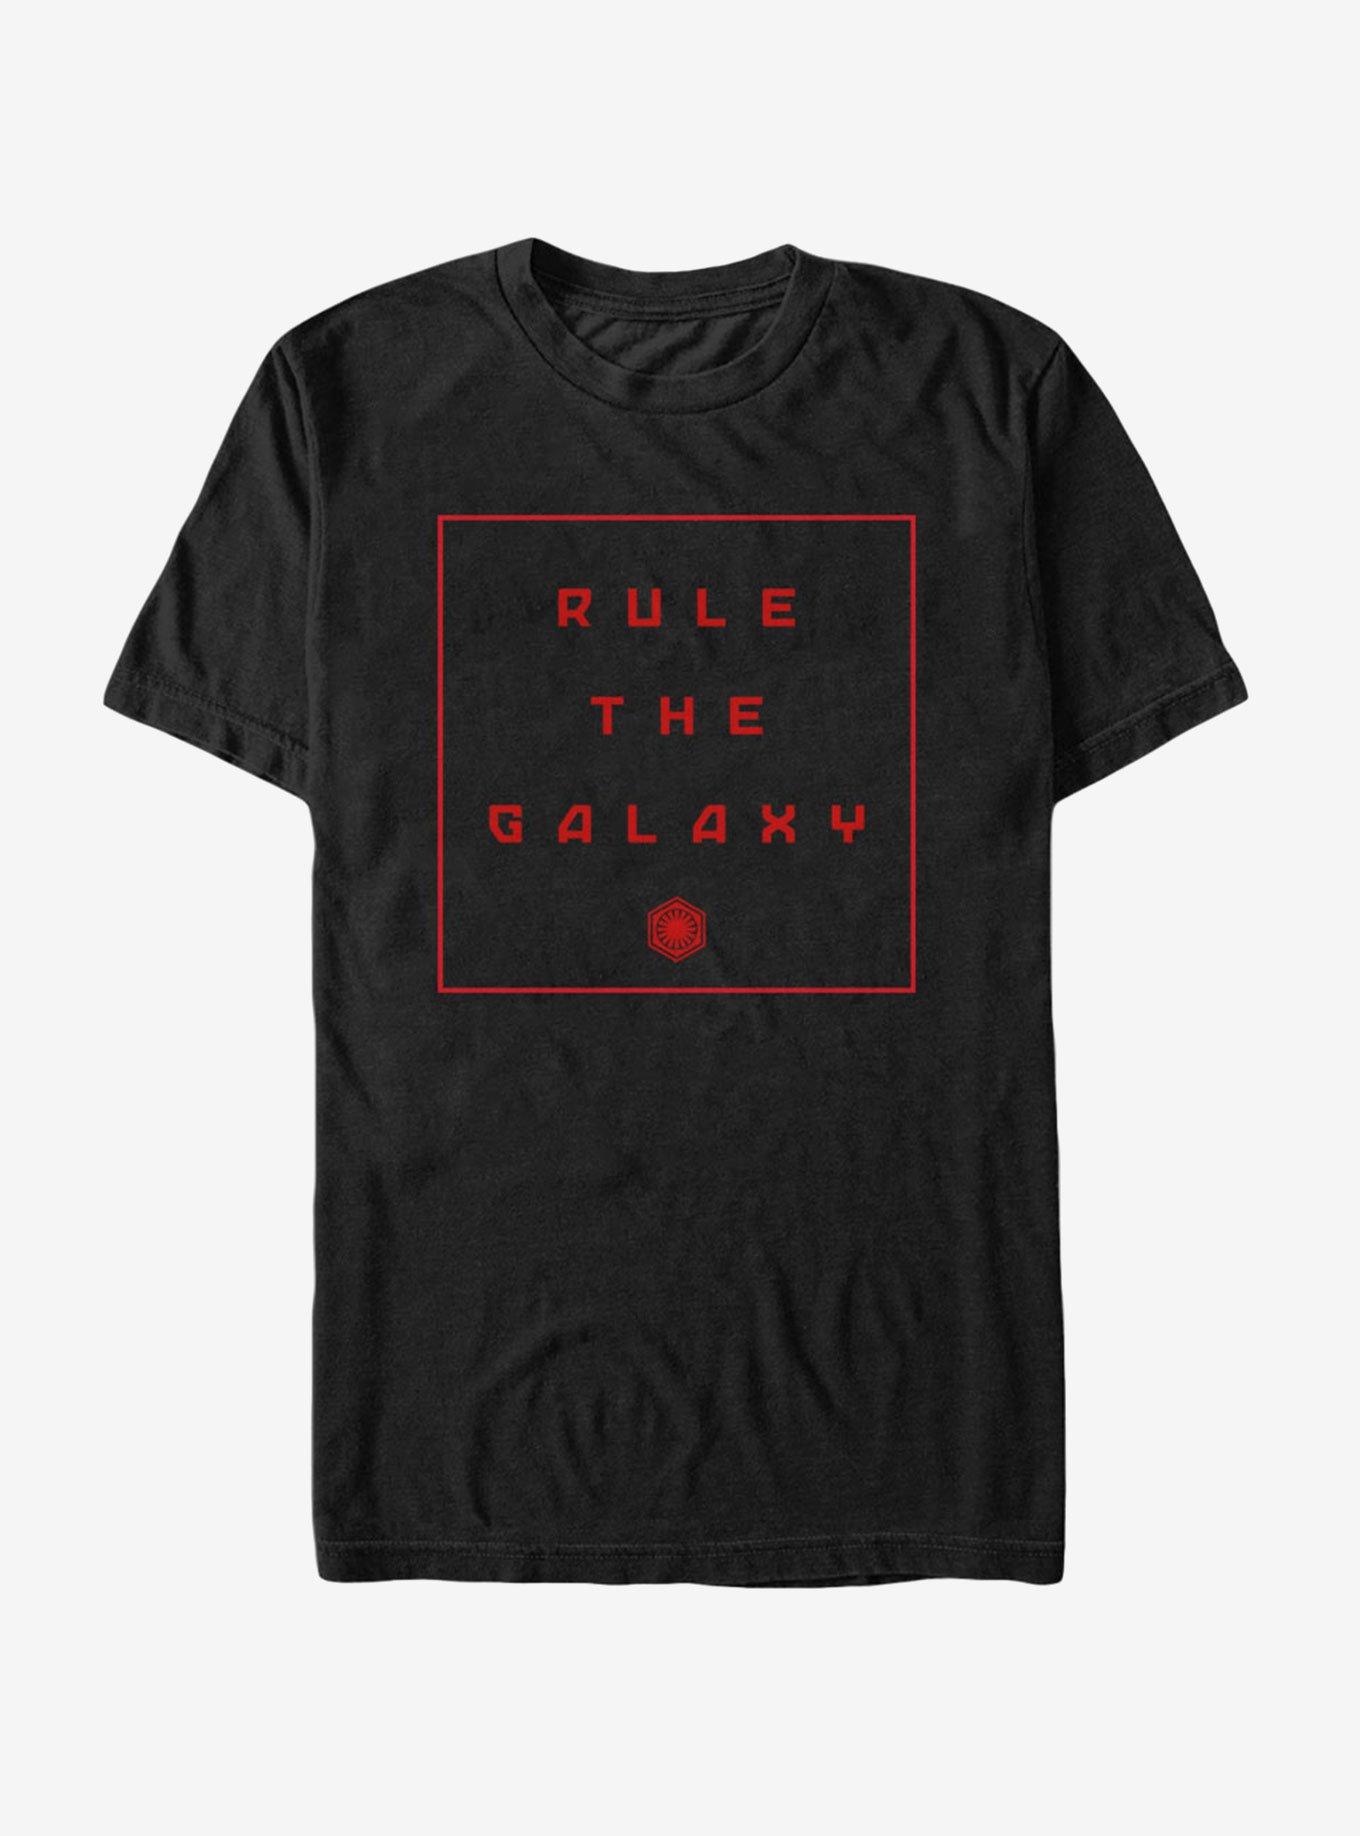 Star Wars The Force Awakens Rule the Galaxy T-Shirt, BLACK, hi-res